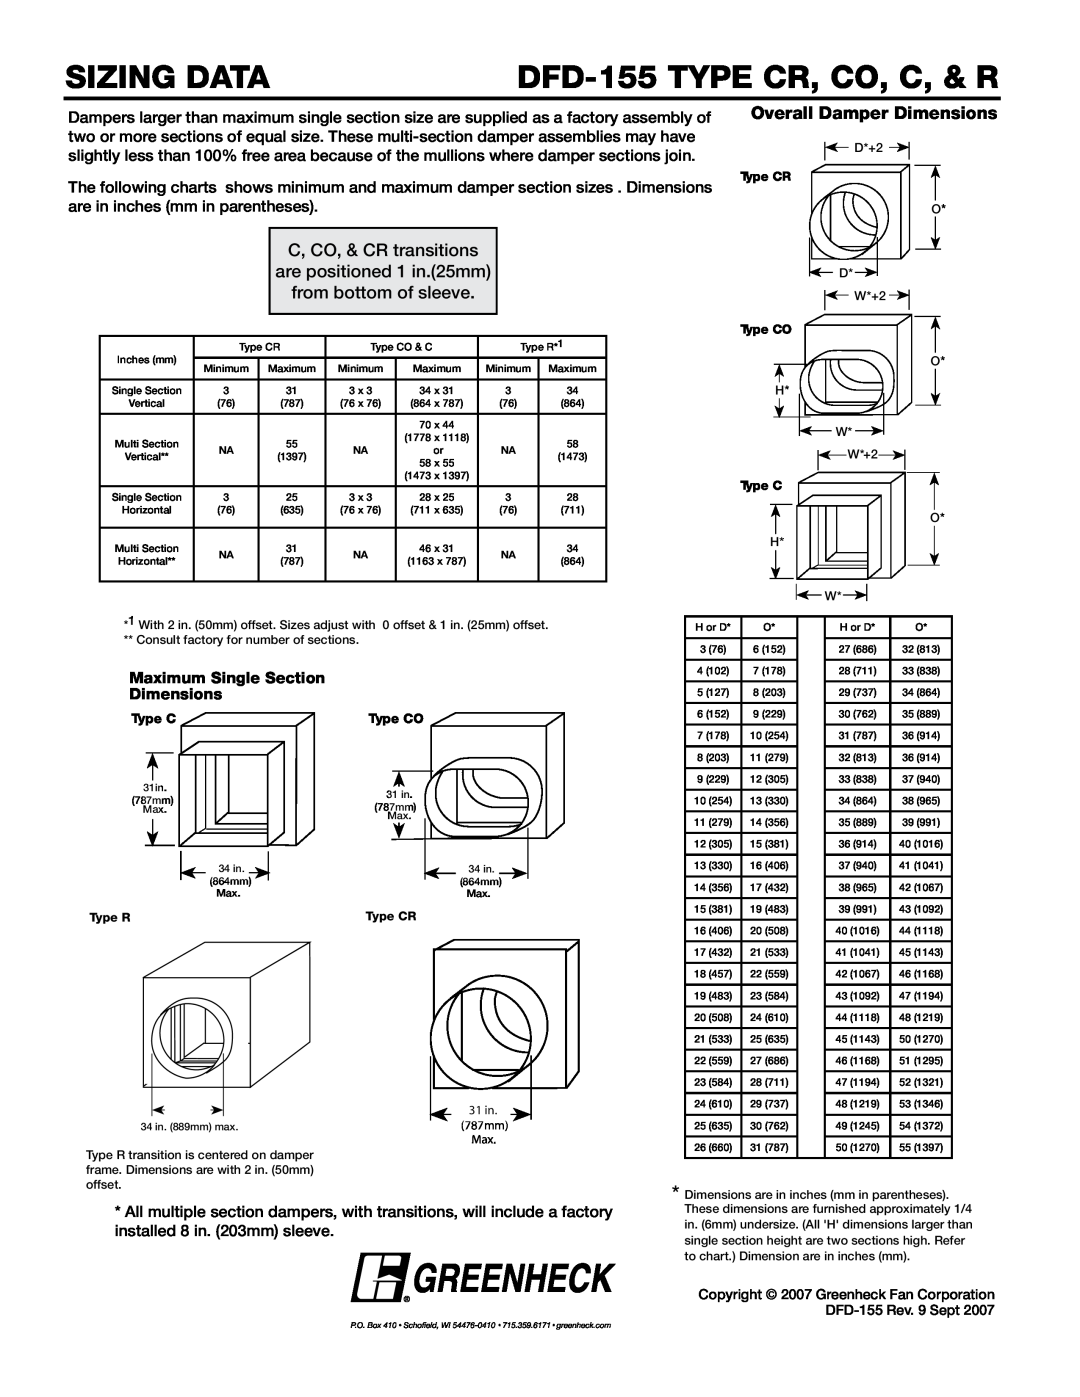 Greenheck Fan Maximum Single Section Dimensions, Sizing Data, DFD-155Type CR, CO, C, & R, from bottom of sleeve 